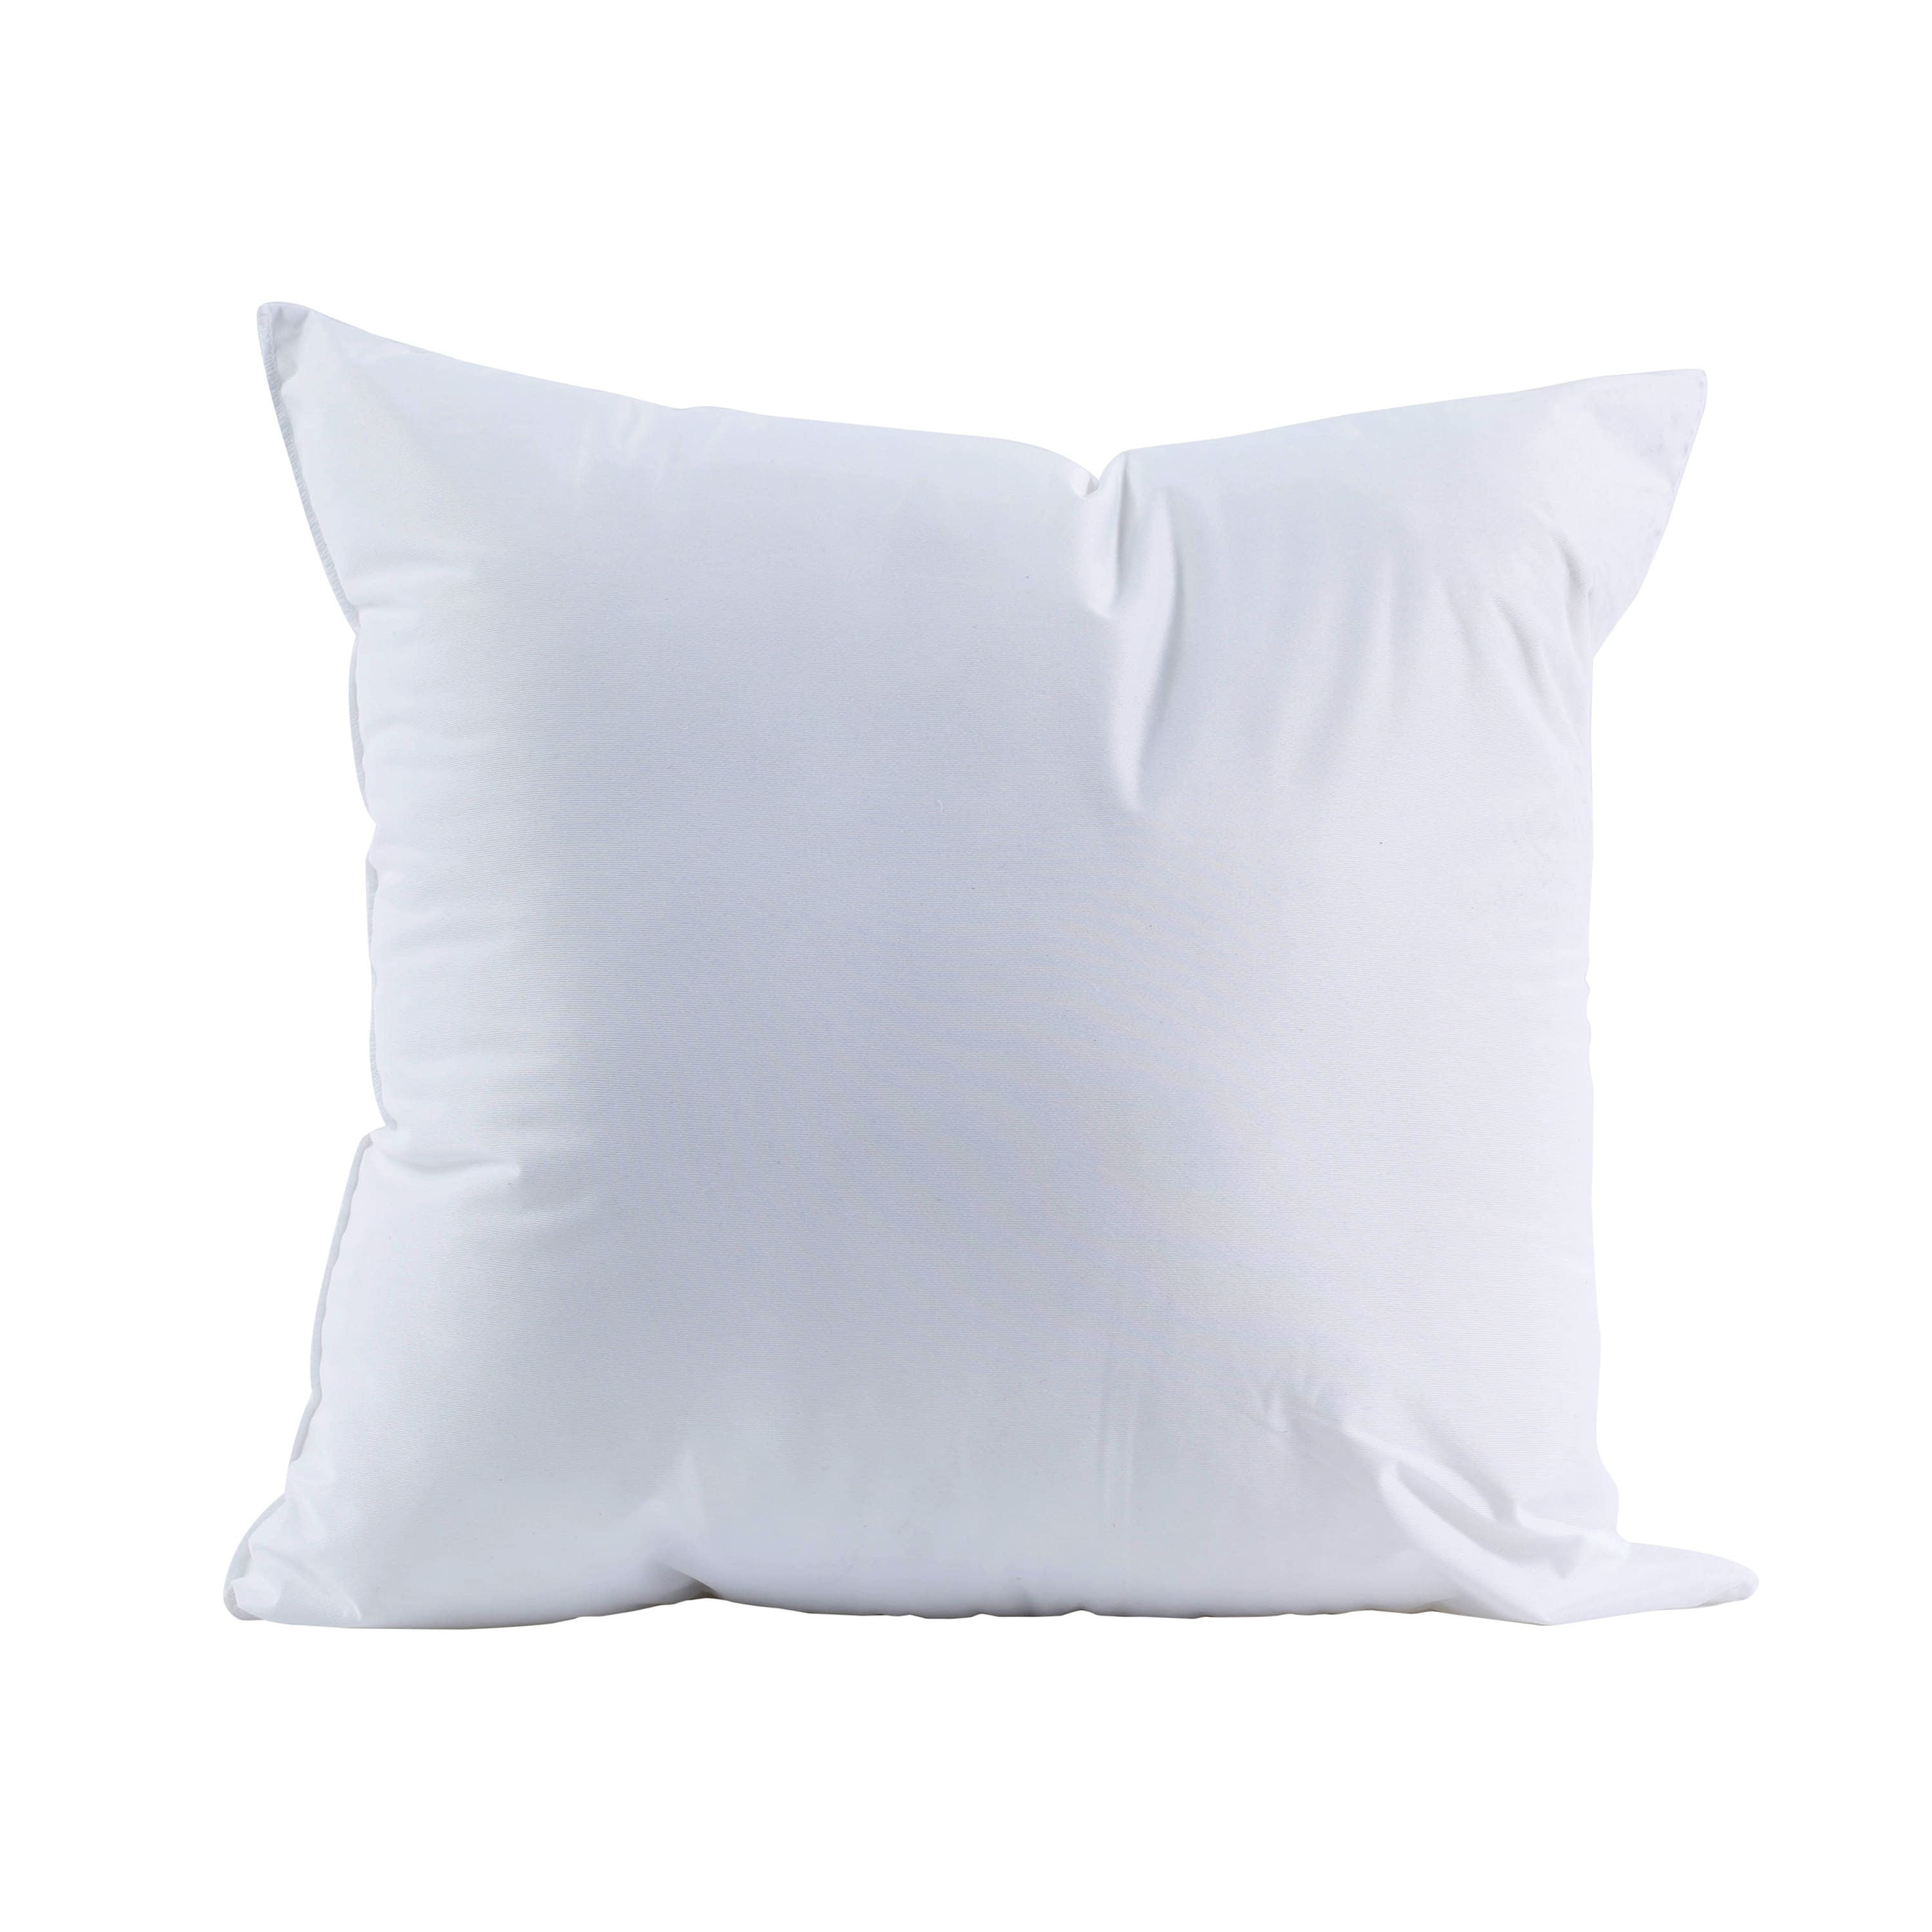 Poly-Fil&#xAE; Weather Soft&#x2122; Indoor/Outdoor Pillow Insert, 18&#x22; x 18&#x22;